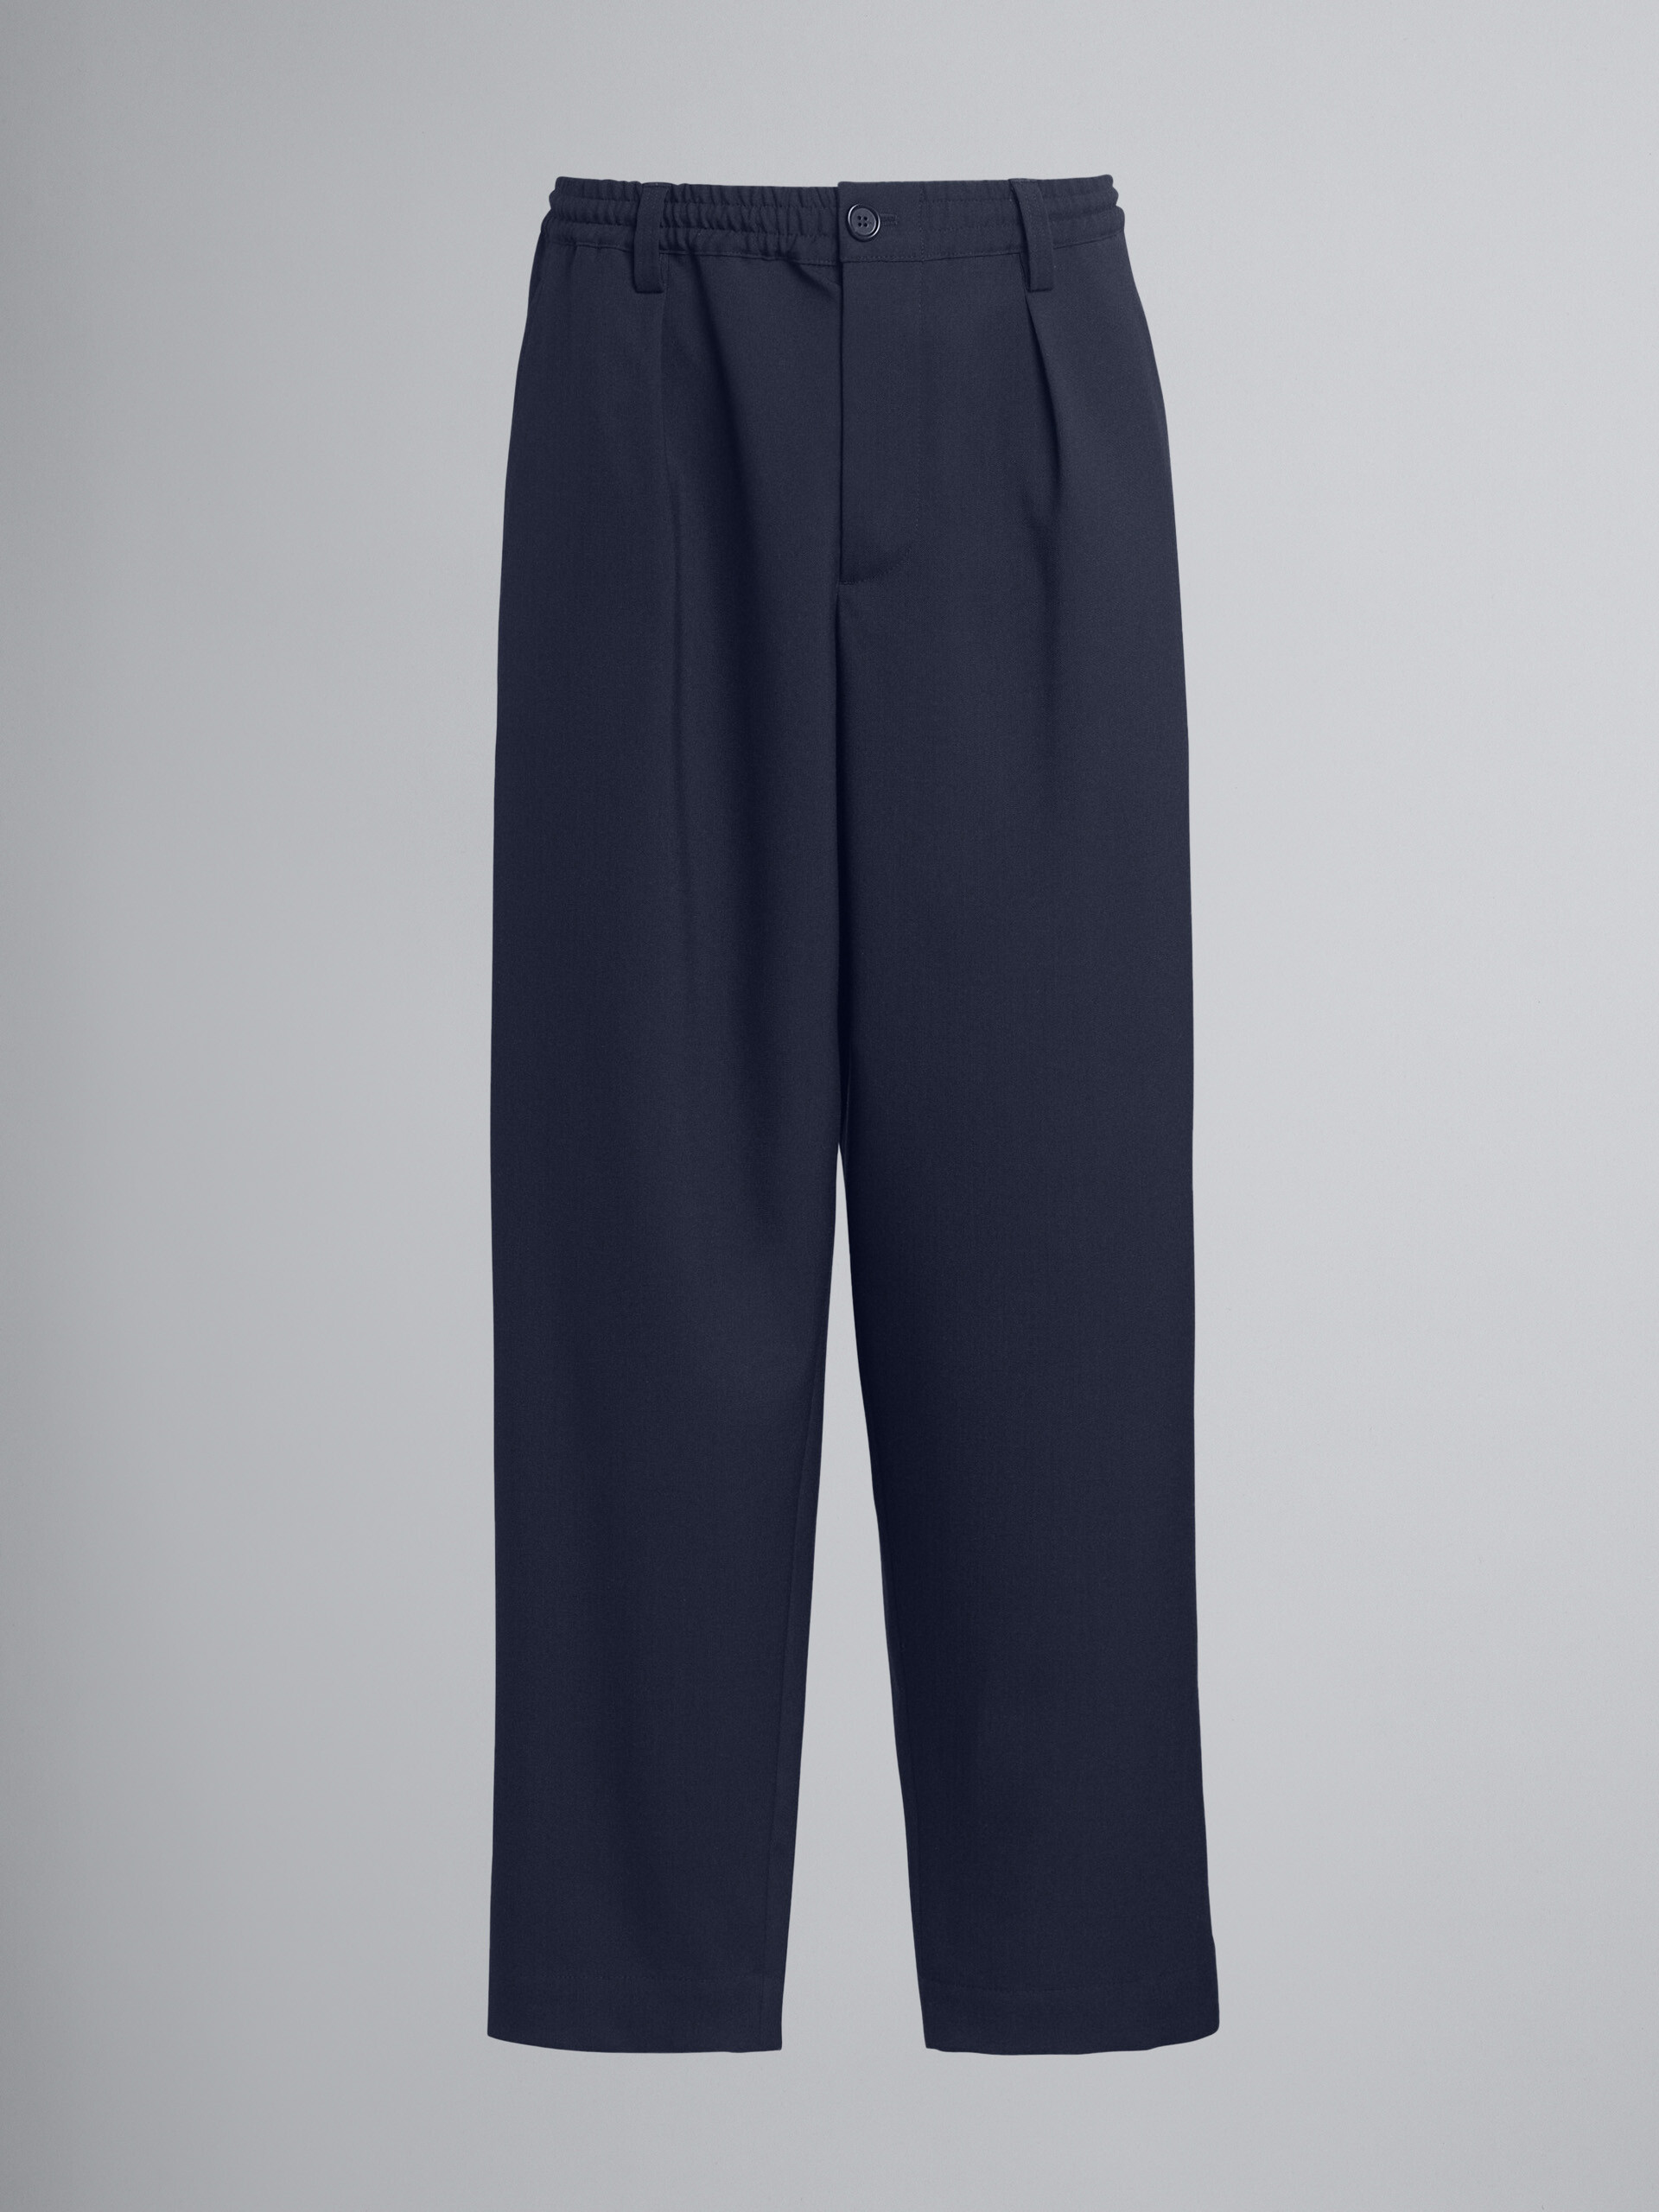 Cropped trousers in cool wool with drawstring at the waist - Pants - Image 1